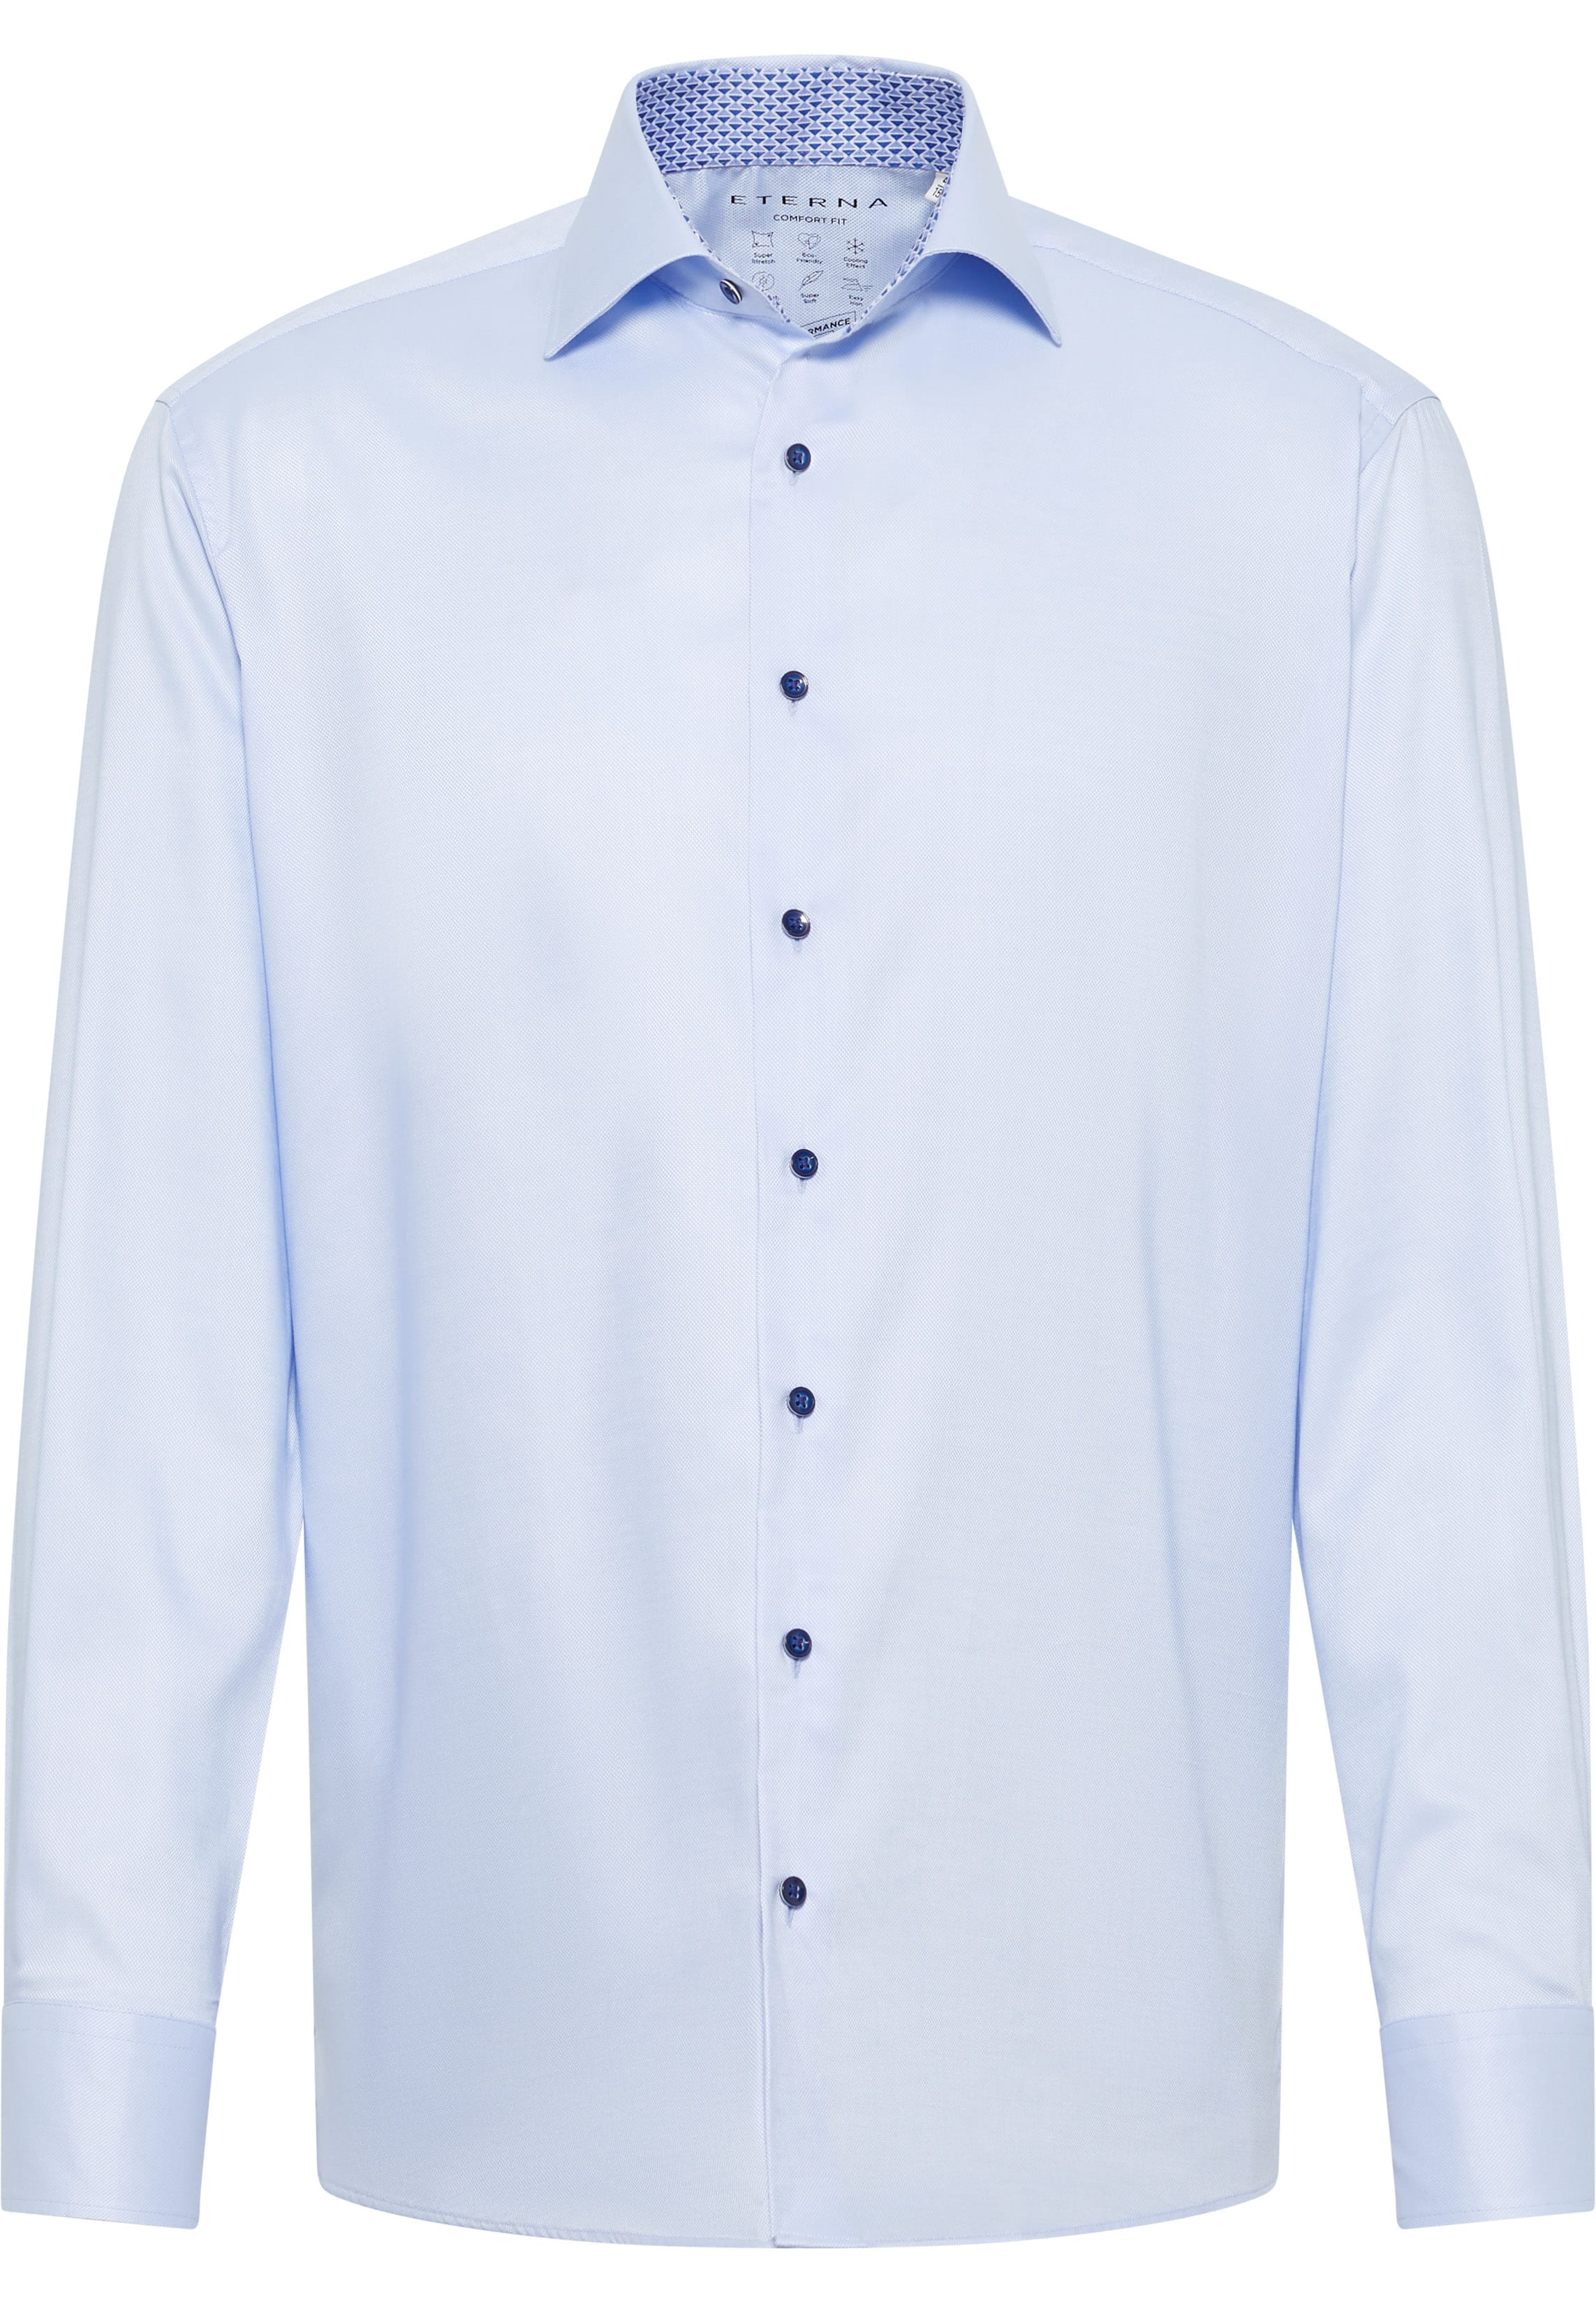 COMFORT FIT Performance Shirt in light blue structured